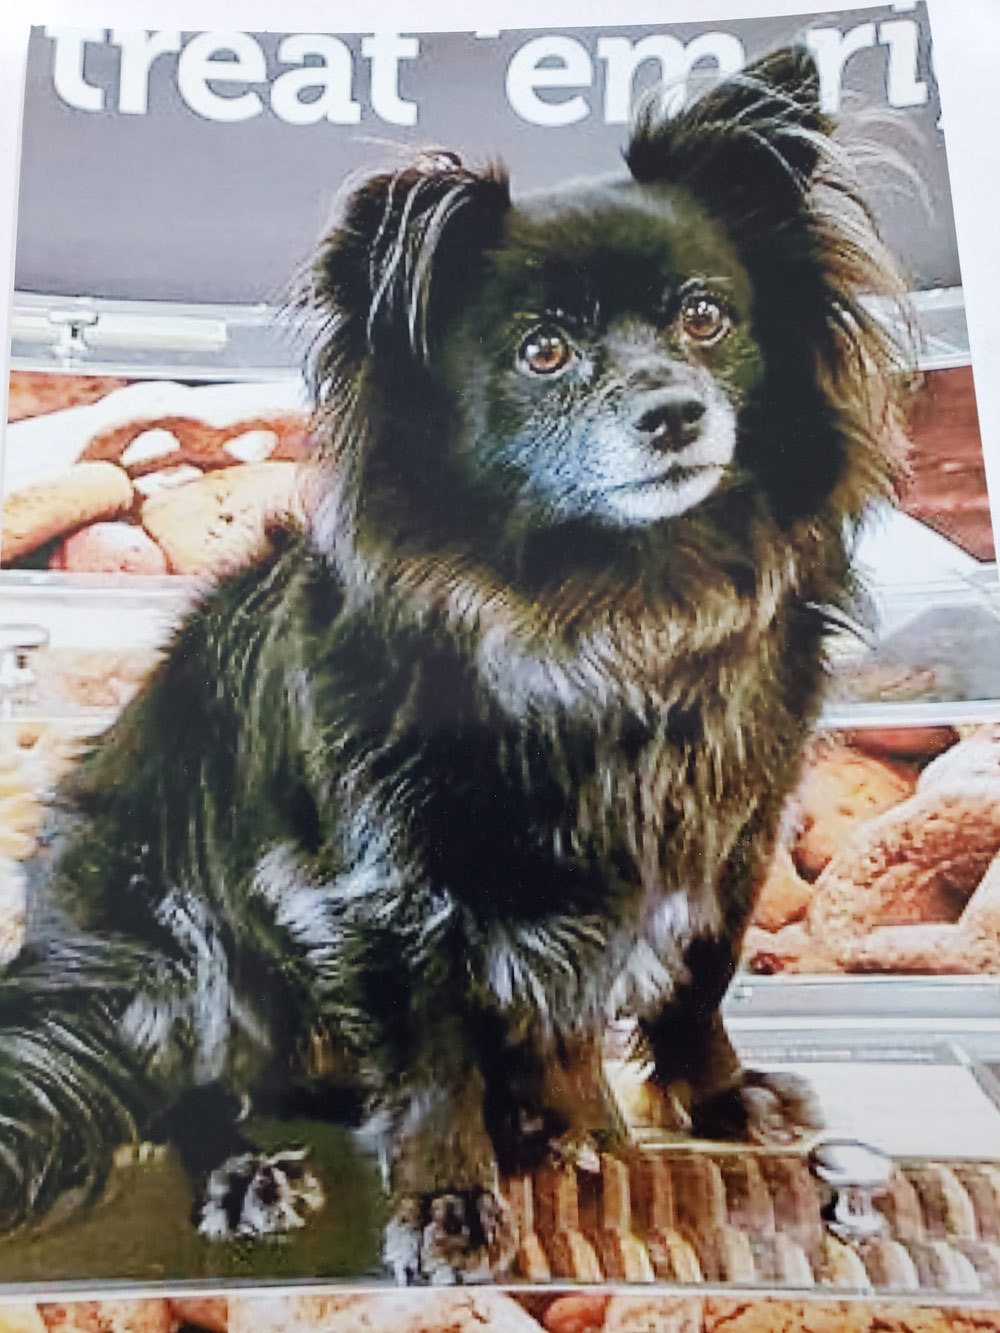 Meet Pamela F. In Grenada Hills CA's Daisy. Daisy's a nine-year-old inky Pomeranian and Chihuahua mix. Pamela takes Daisy everywhere, and Daisy's loved by all who meet her.